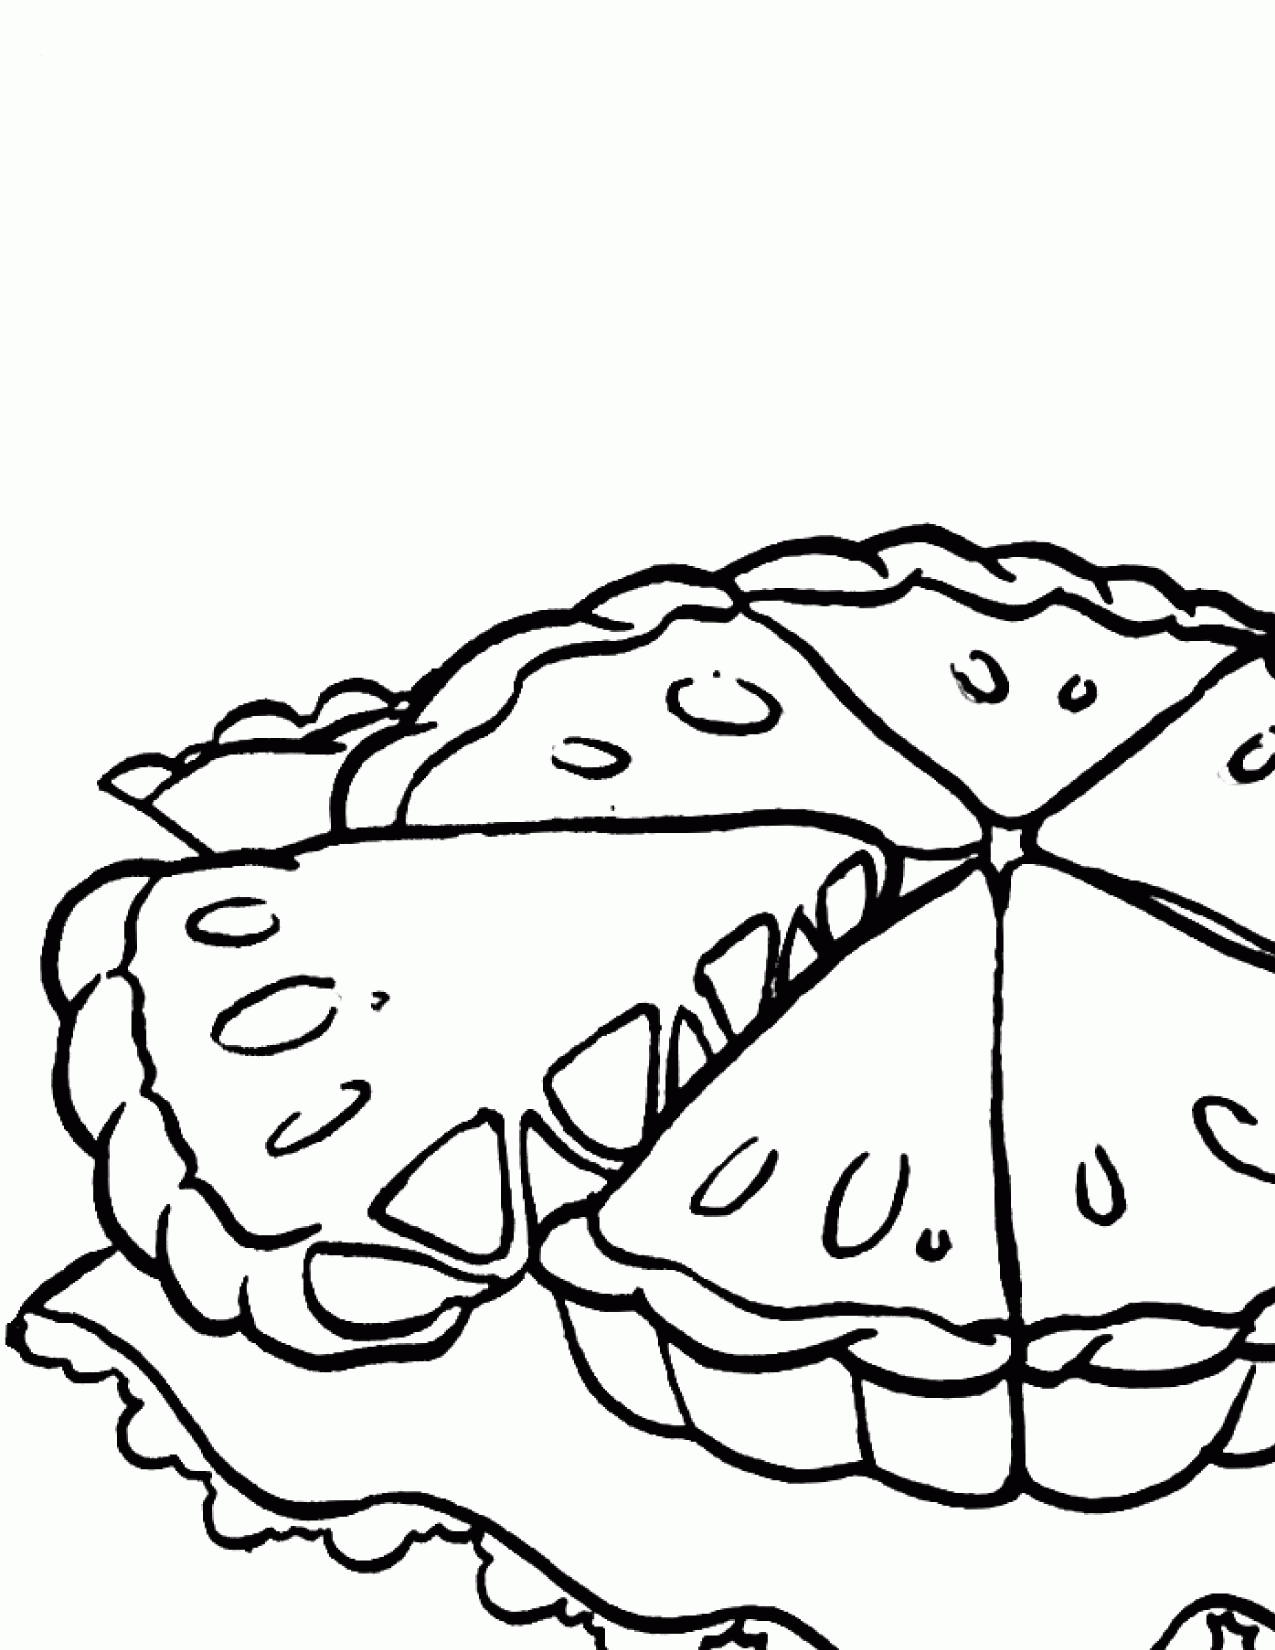 Free Images Of A Pie Coloring Page - Coloring Home